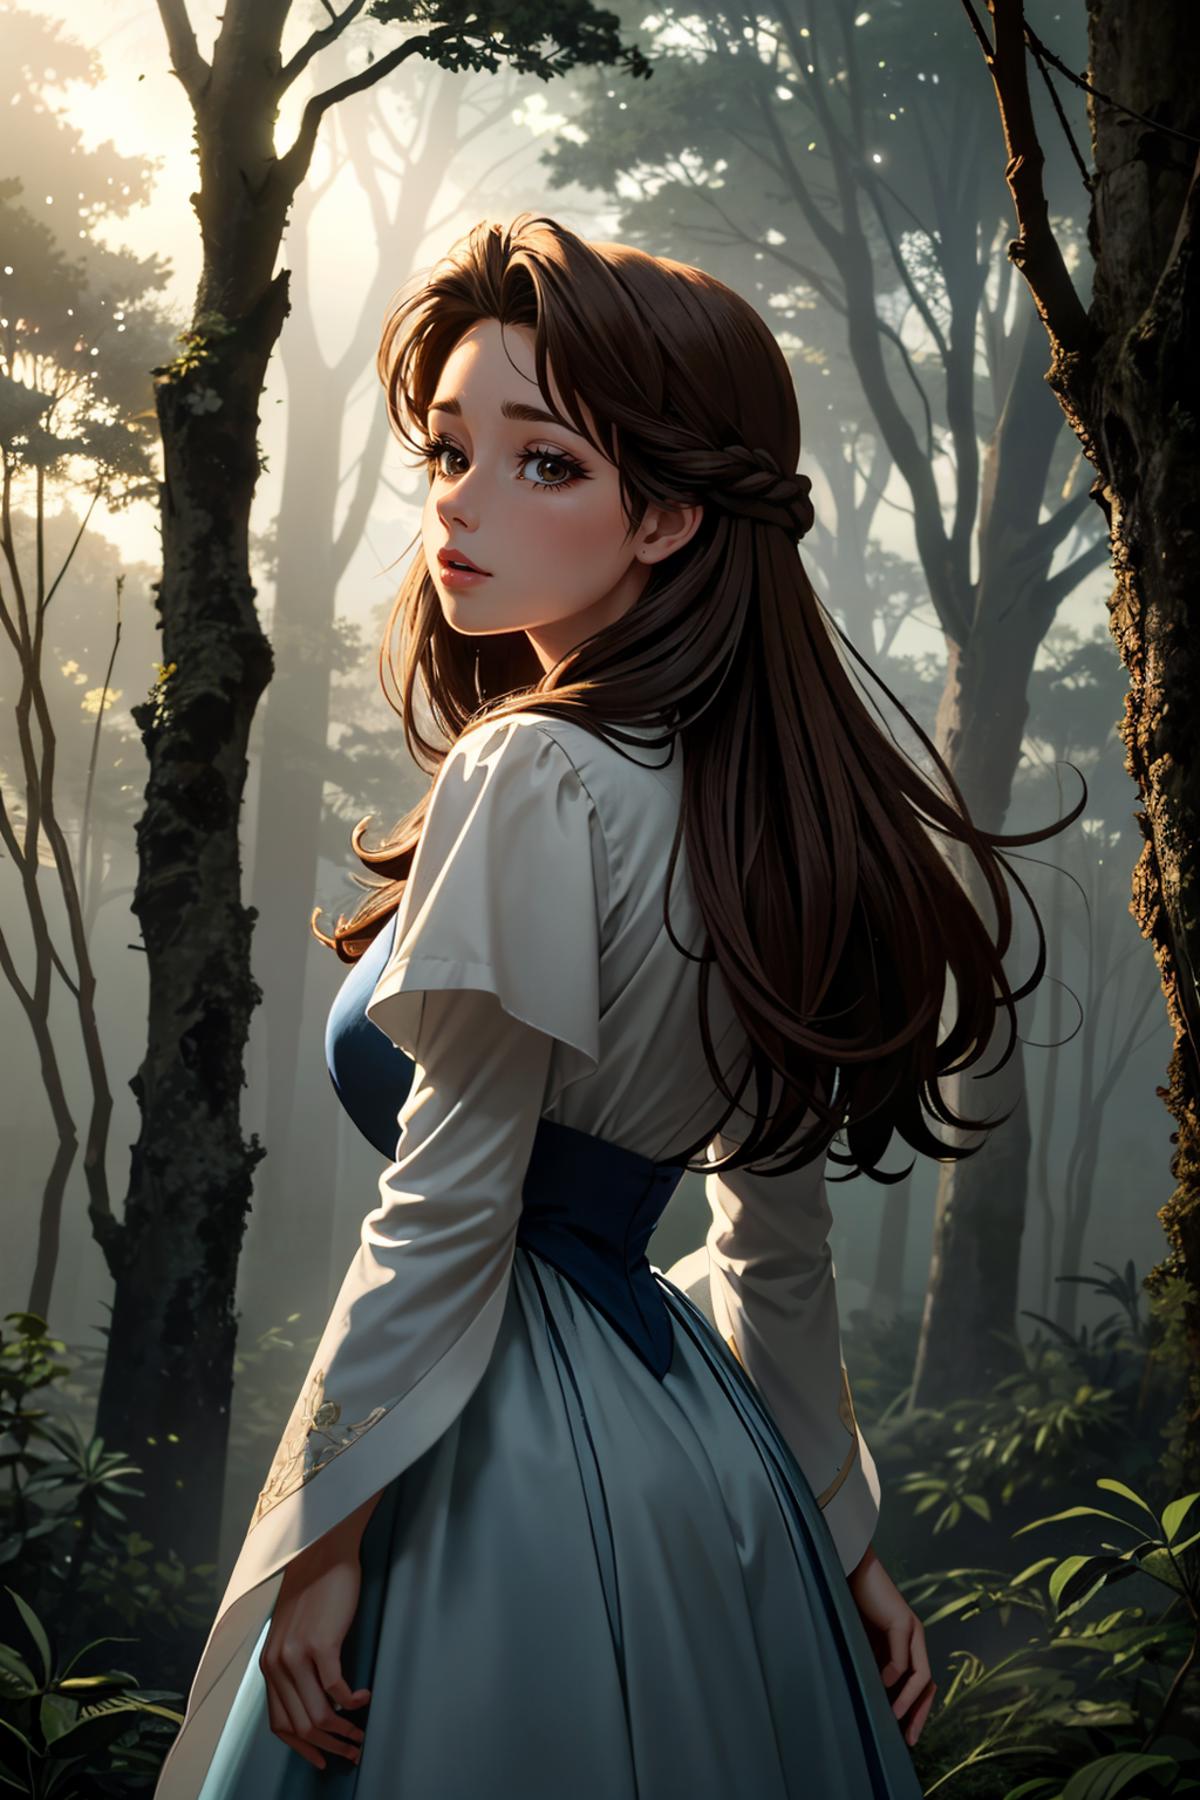 Belle from Beauty and the Beast image by BloodRedKittie